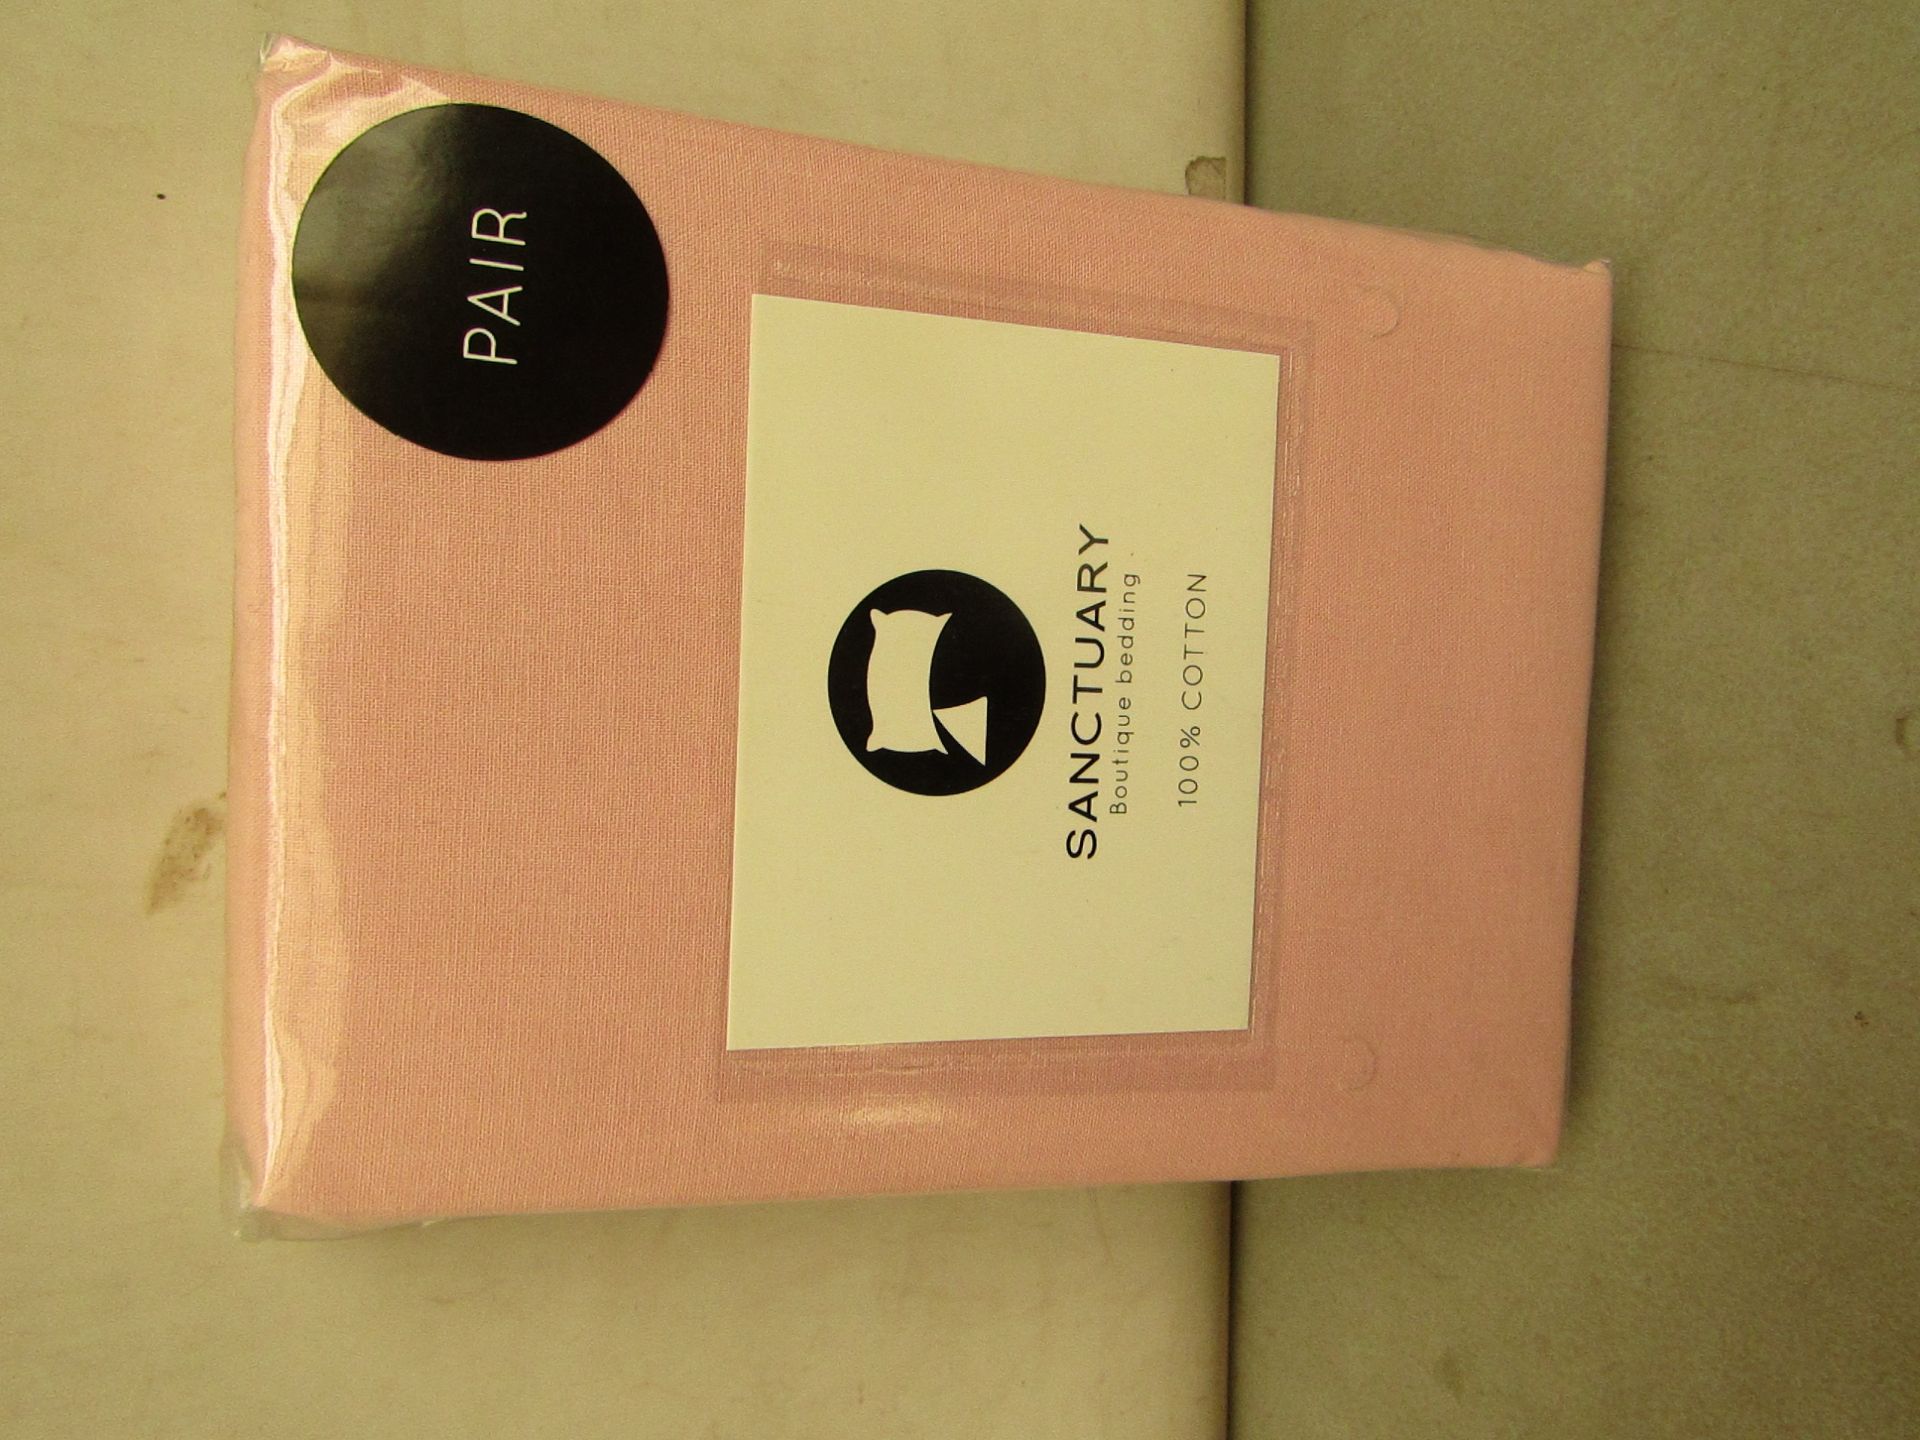 Pair of Sanctuary Blush Pillowcases. New & Packaged